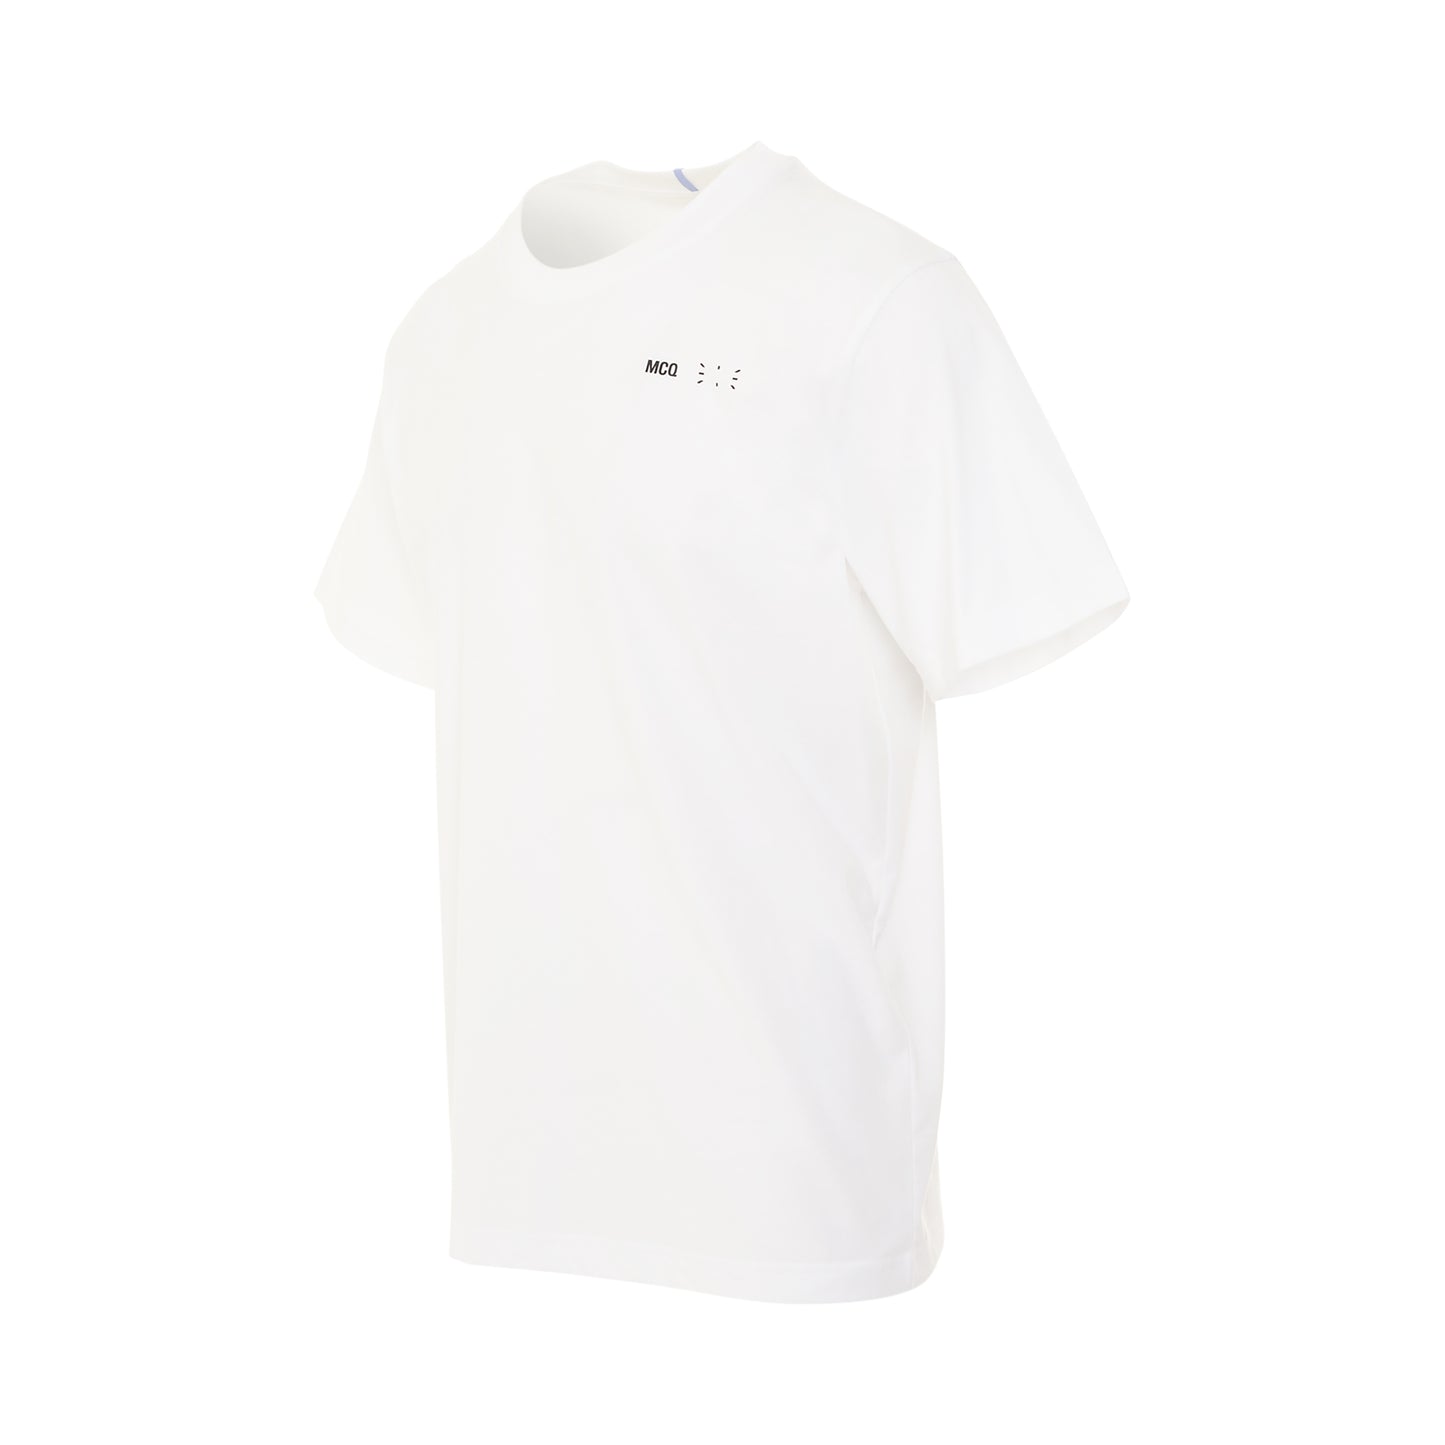 IC0 Embroidered Logo T-Shirt in Optic White